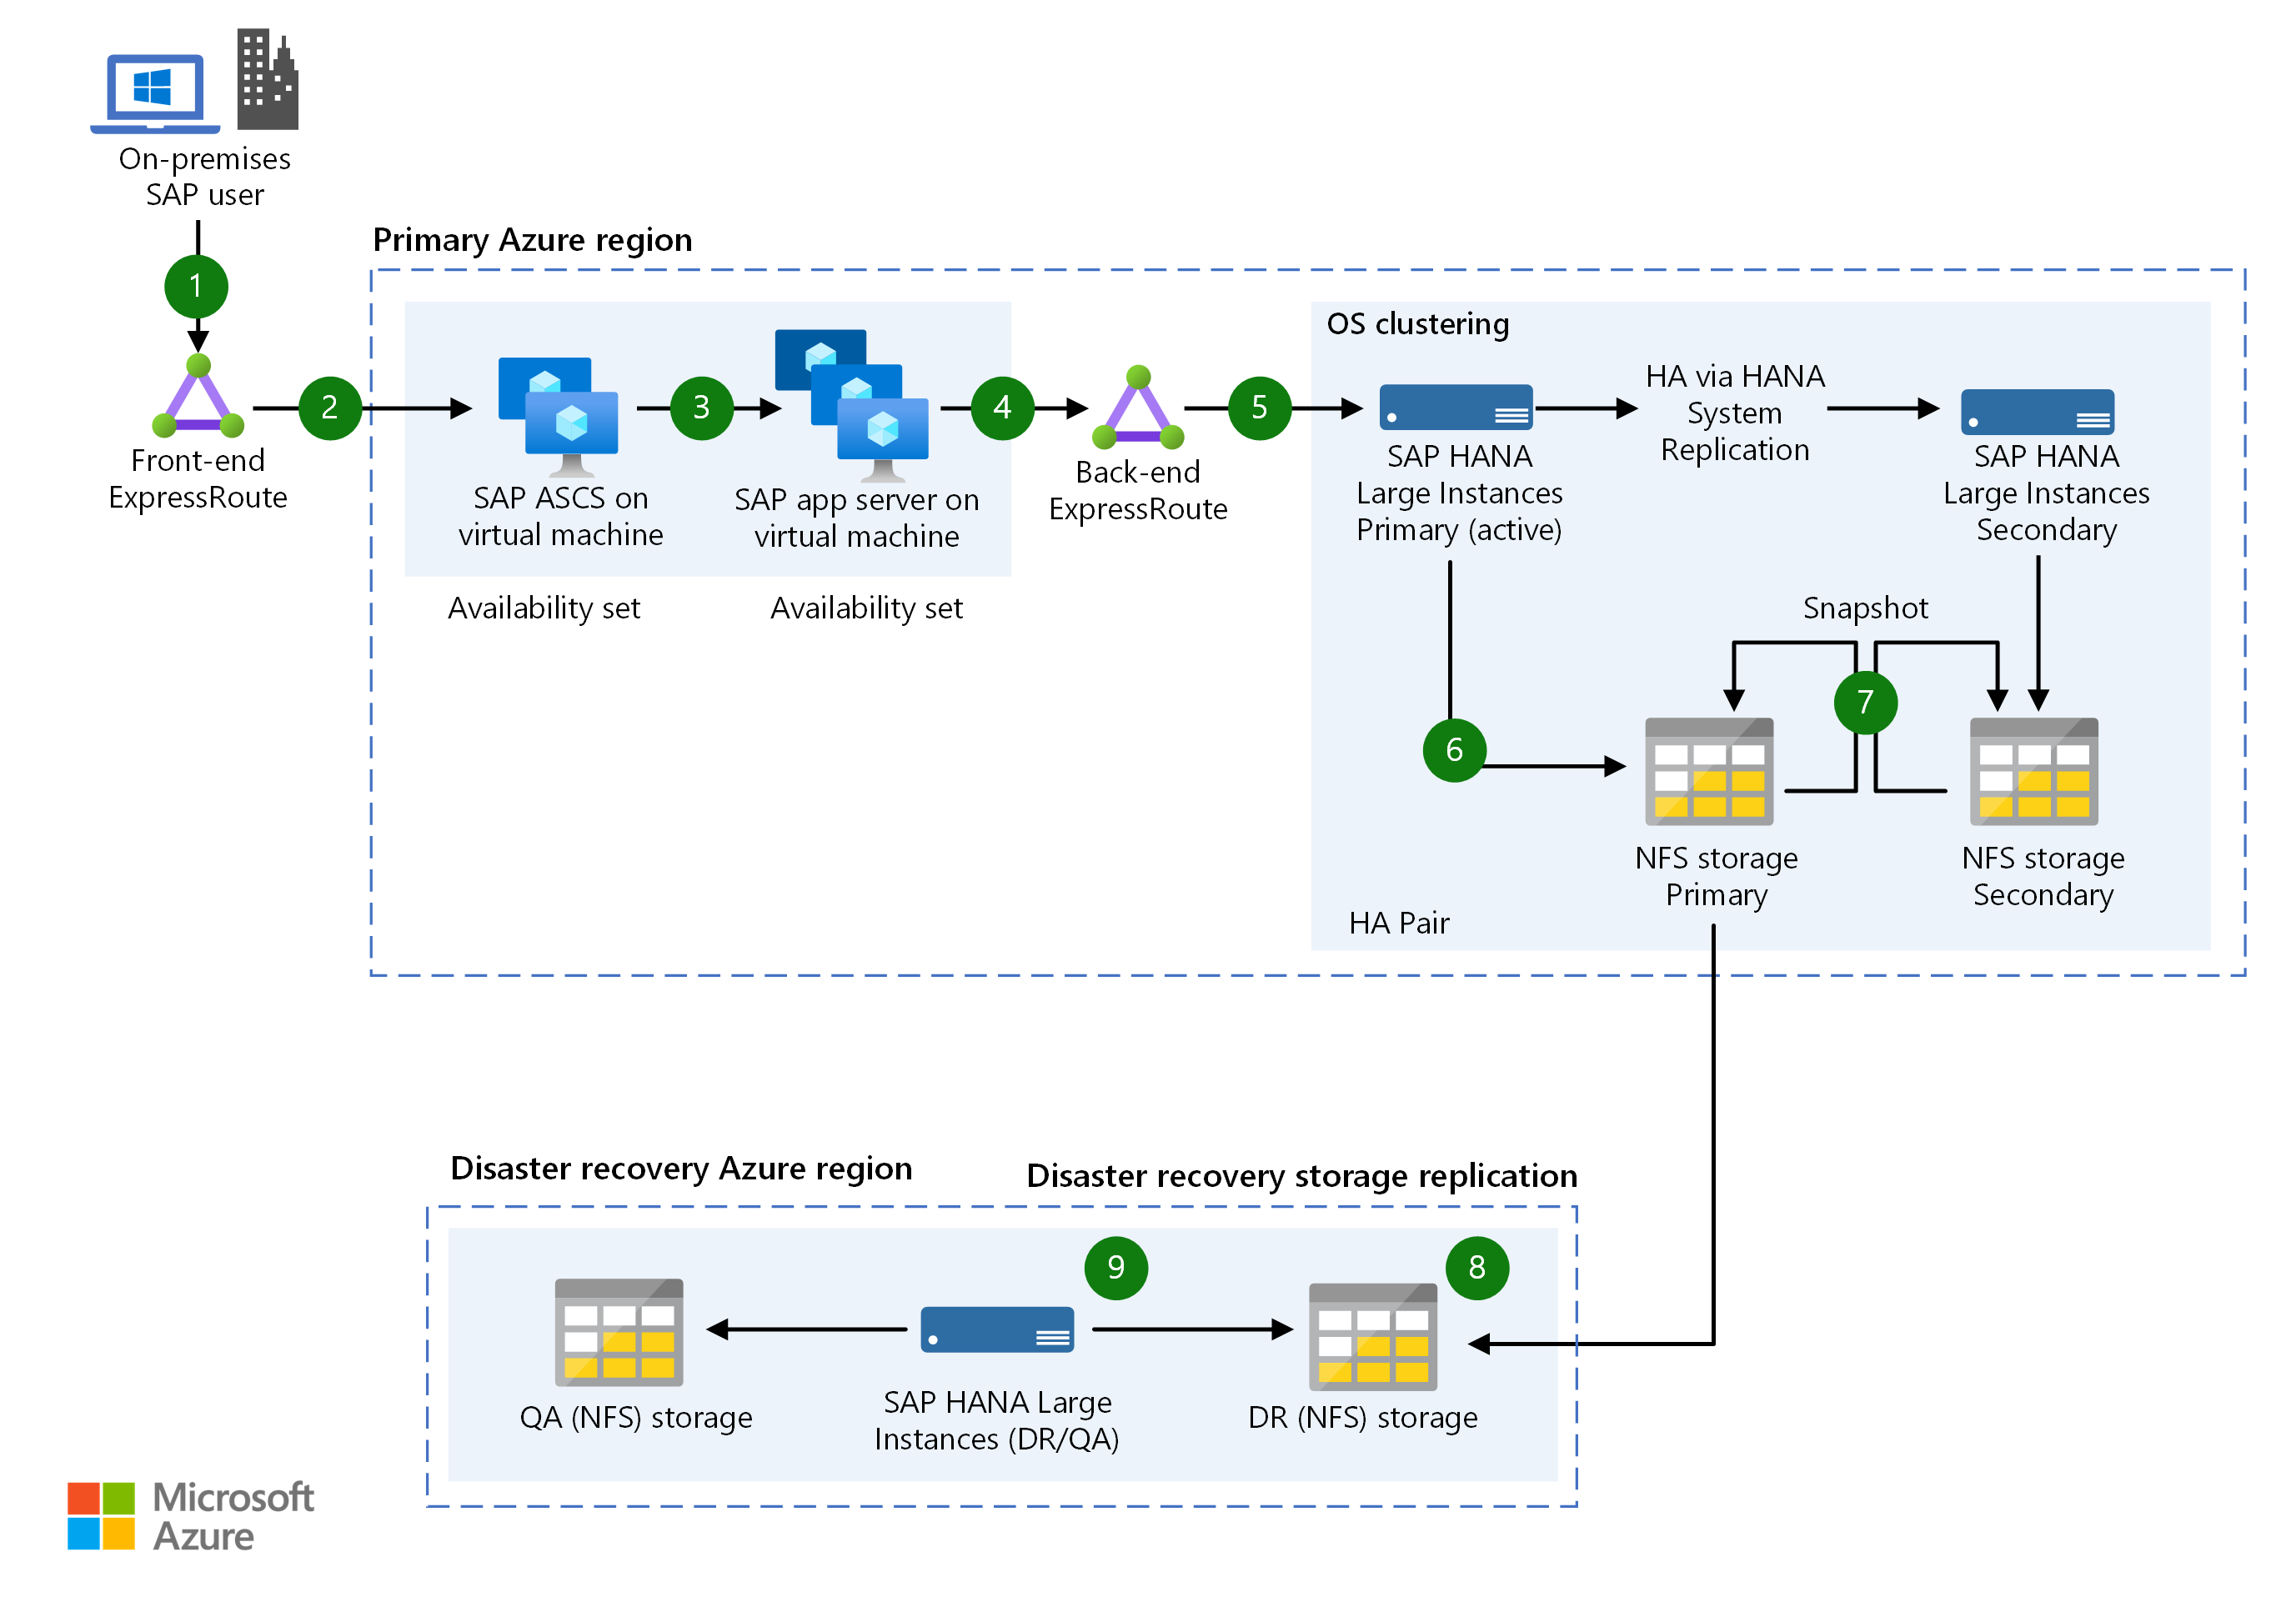 Architecture diagram shows Front-end route, through Primary Azure Region to O S Clustering, to D R storage replication in D R Azure Region.